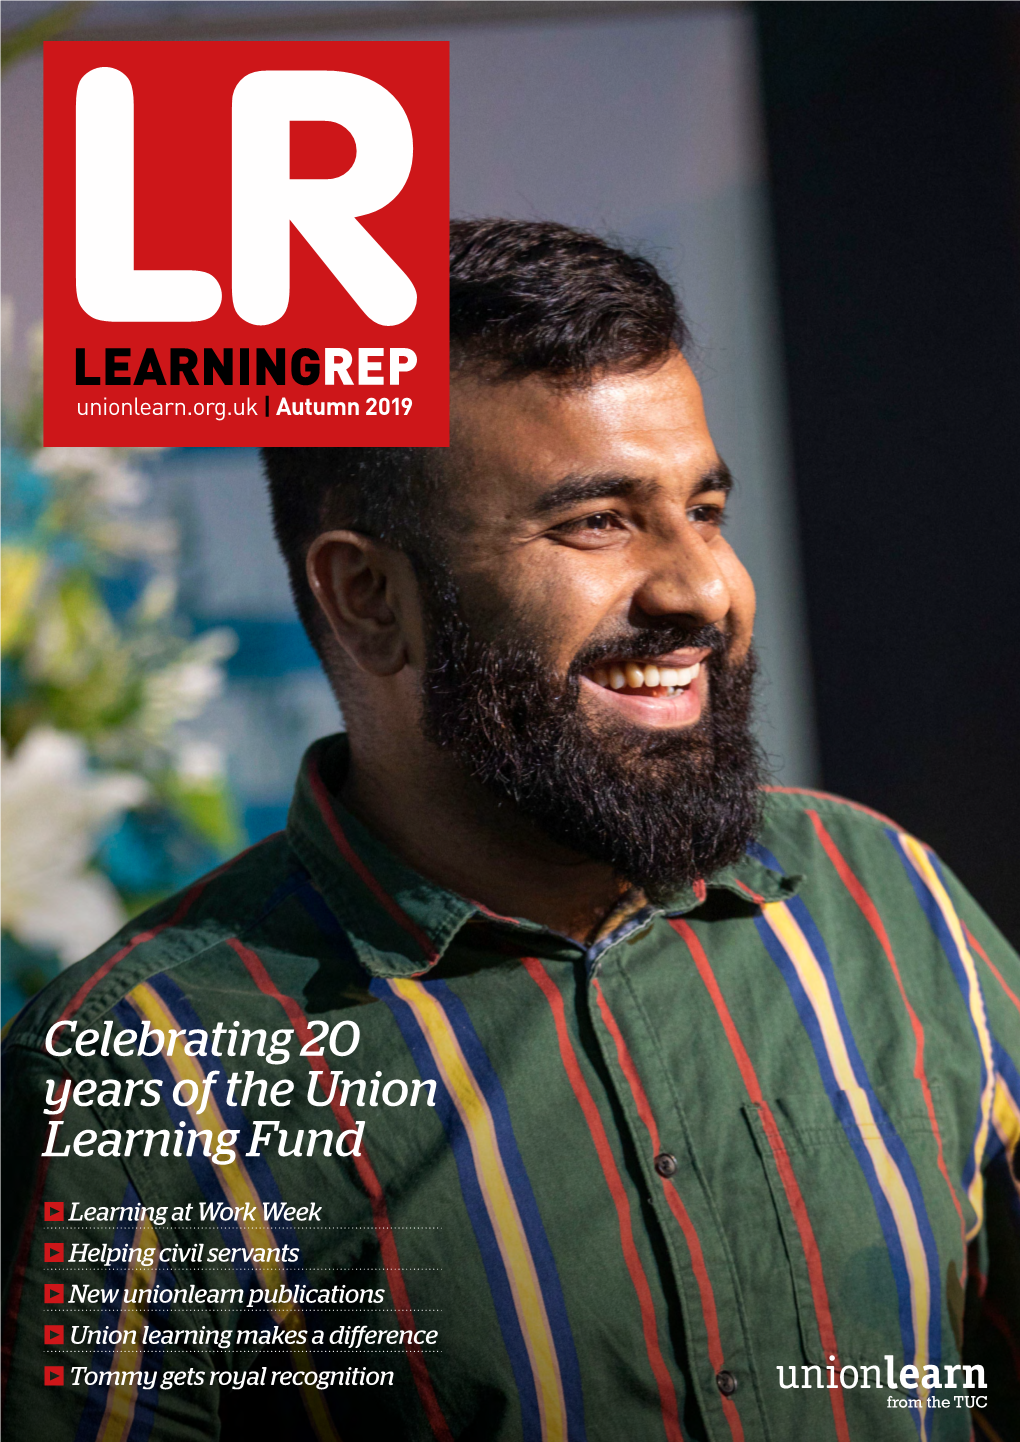 Celebrating 20 Years of the Union Learning Fund